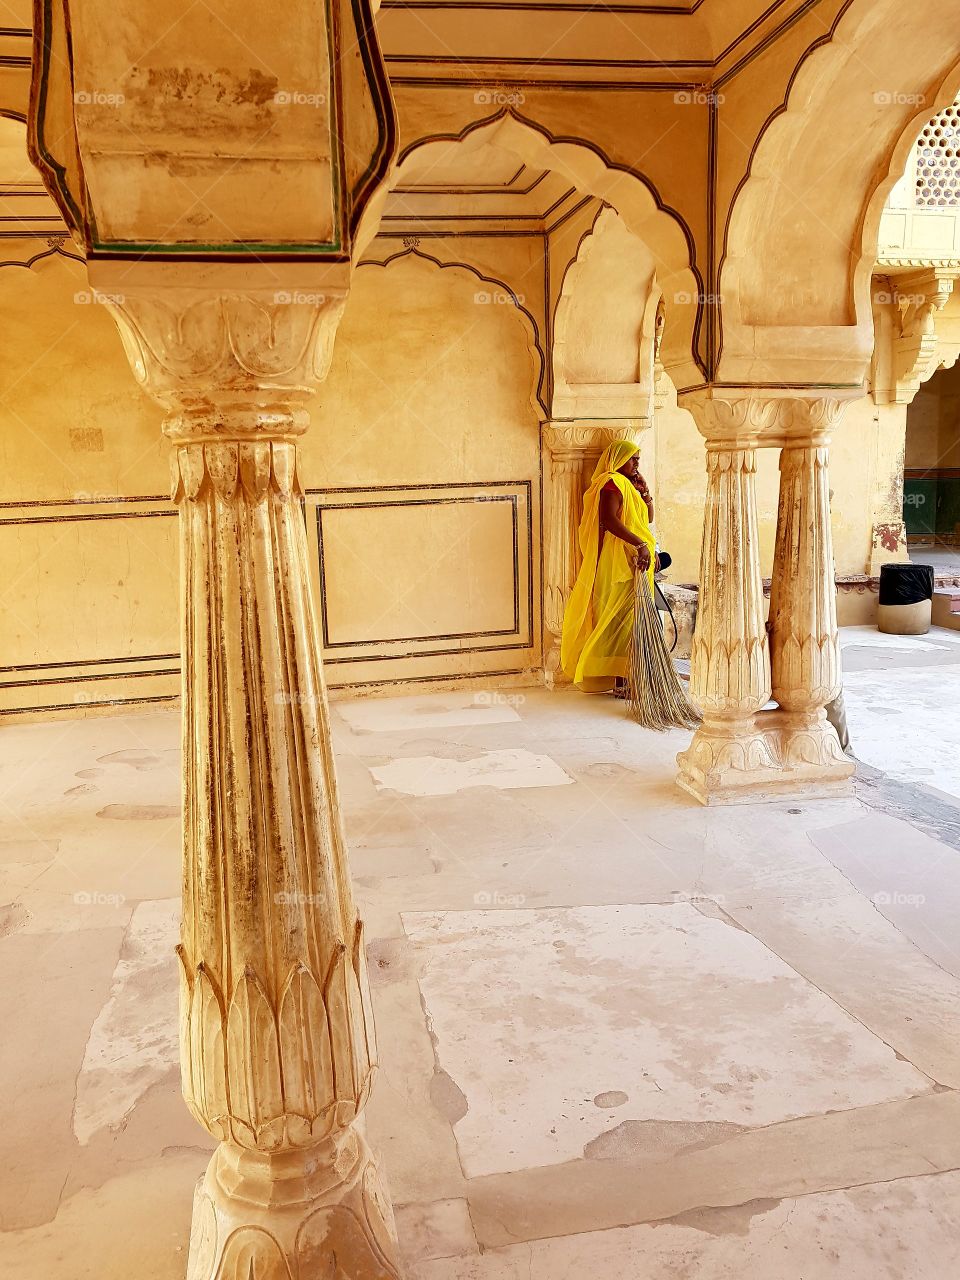 amber fort cleaner